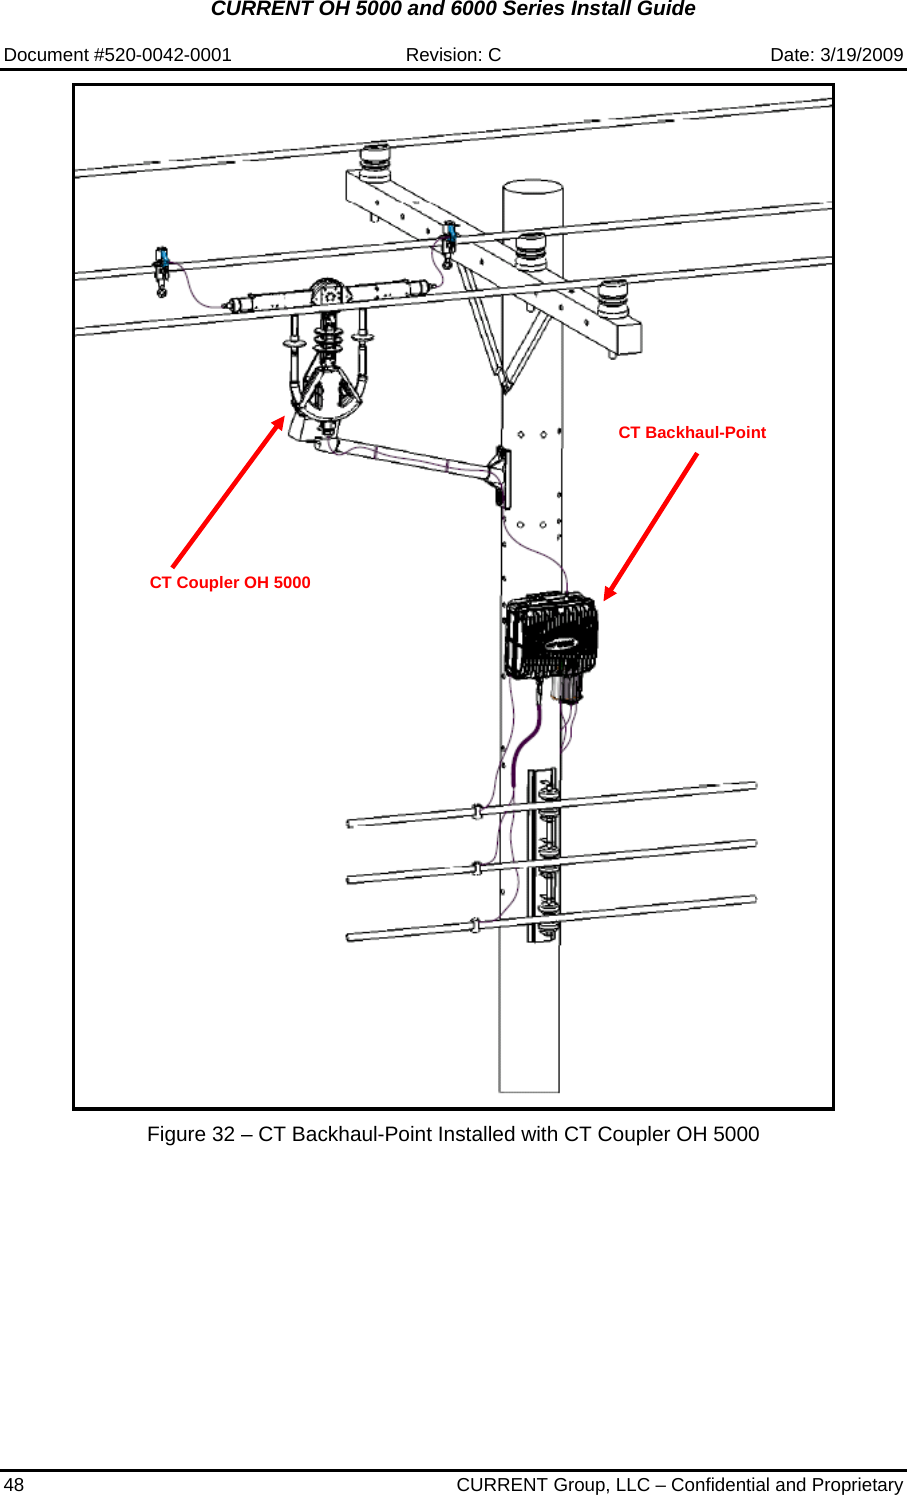 CURRENT OH 5000 and 6000 Series Install Guide  Document #520-0042-0001  Revision: C  Date: 3/19/2009 48  CURRENT Group, LLC – Confidential and Proprietary       Figure 32 – CT Backhaul-Point Installed with CT Coupler OH 5000 CT Backhaul-Point CT Coupler OH 5000 